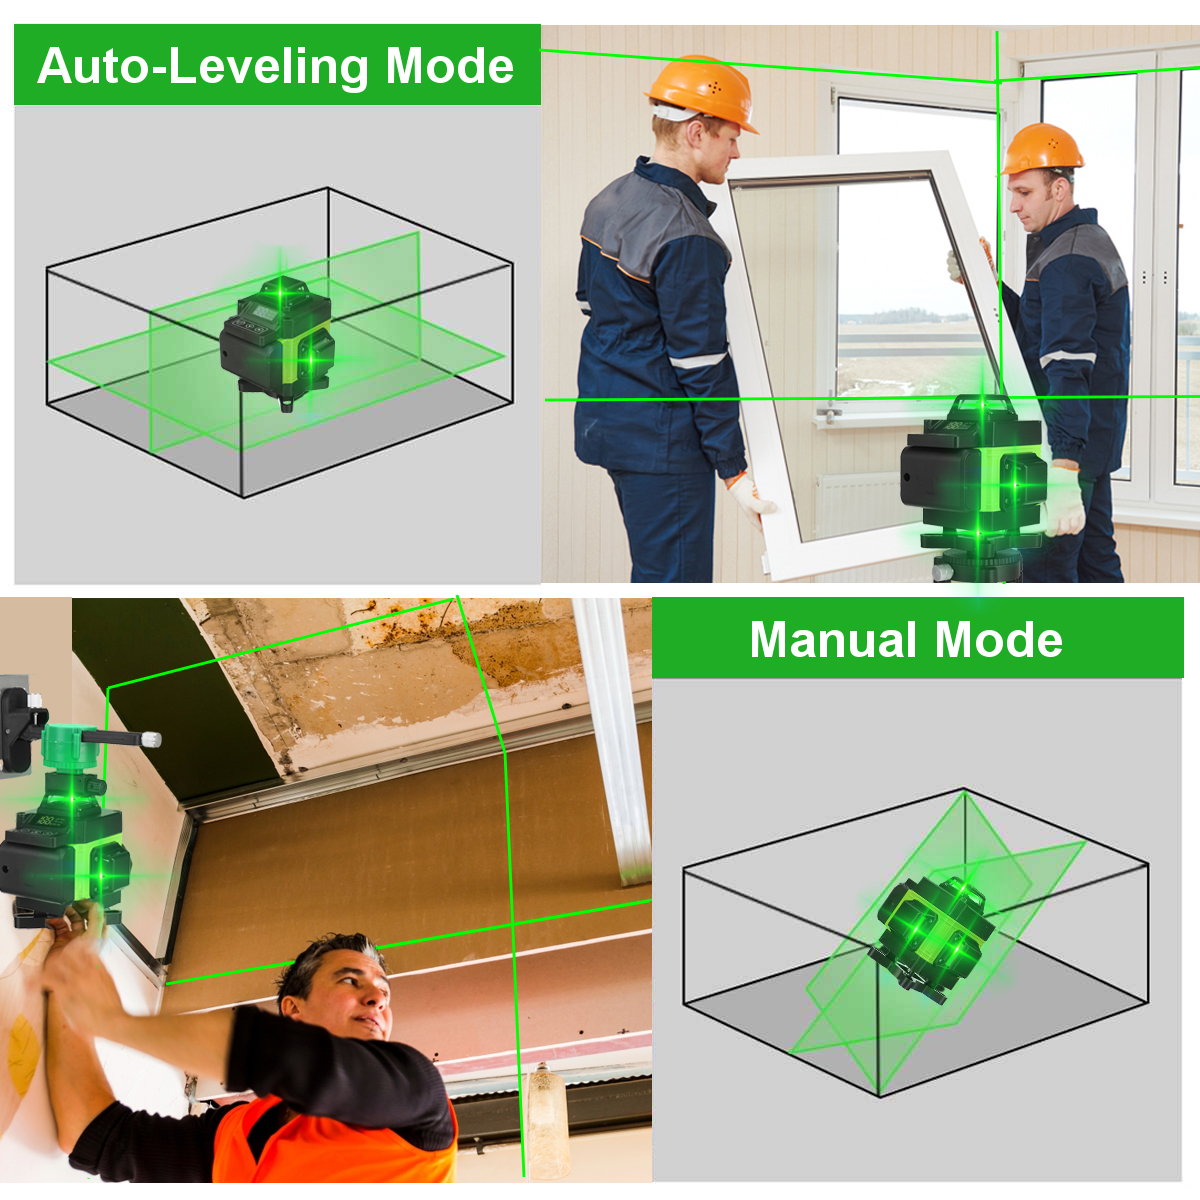 16-Lines-Laser-Level-3D-Green-Horizontal-Vertical-Line-Laser-Auto-Self-Leveling-Remote-Control-Indoo-1906144-12